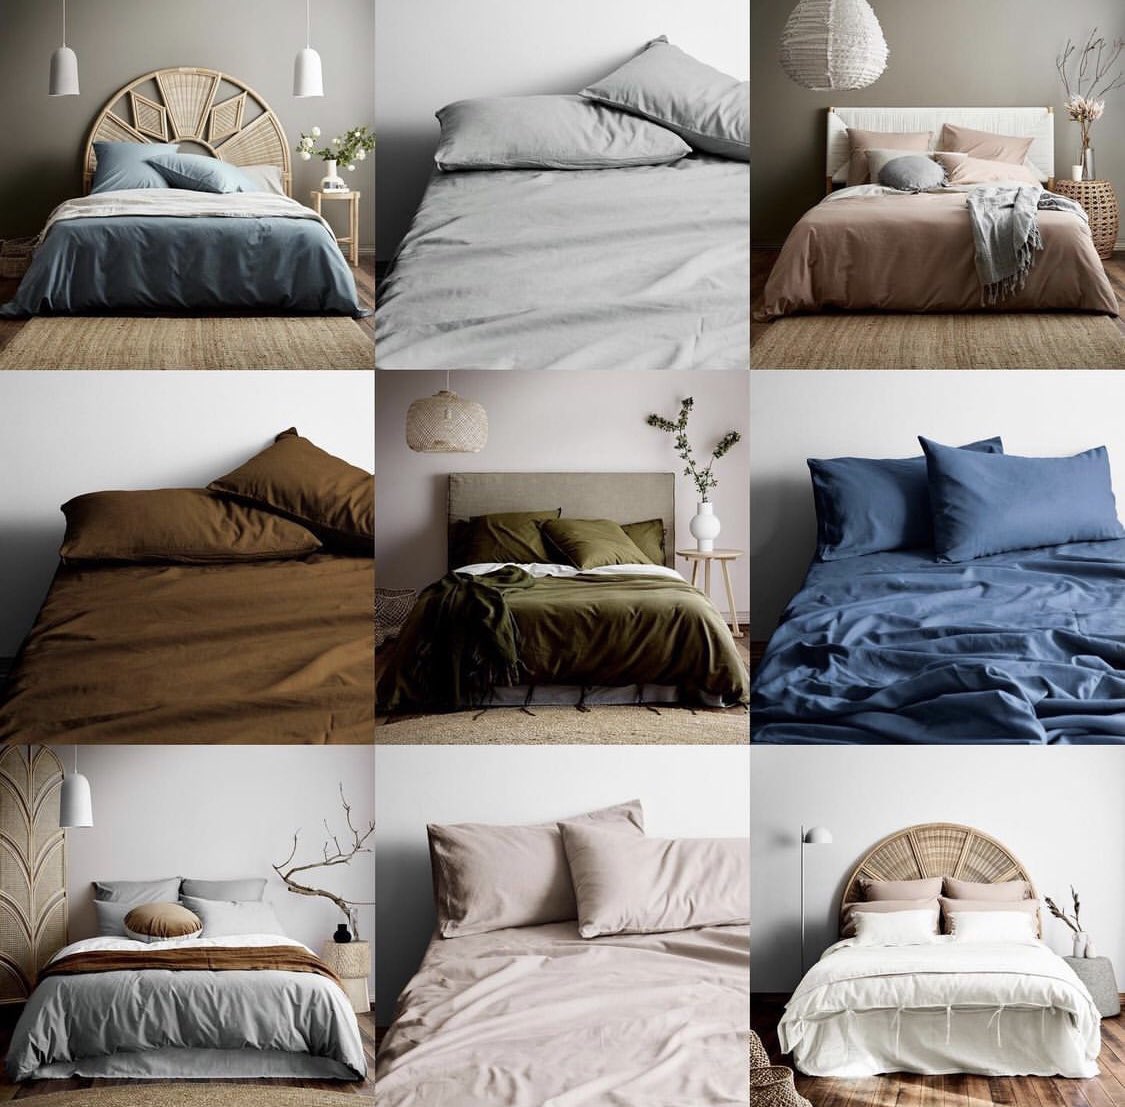 Duvet Cover are awesome choices and they are also handy as they safeguard your Duvet during use and are effortlessly taken-off to be washed. Duvet Covers 4/6 - 20,500 6/6 - 22,500 6/7 - 24,500 7/7 - 26,000 7/8 - 28,000 8/8 - 30,000 #pagesbydamicommerce Wa.me/09021568000